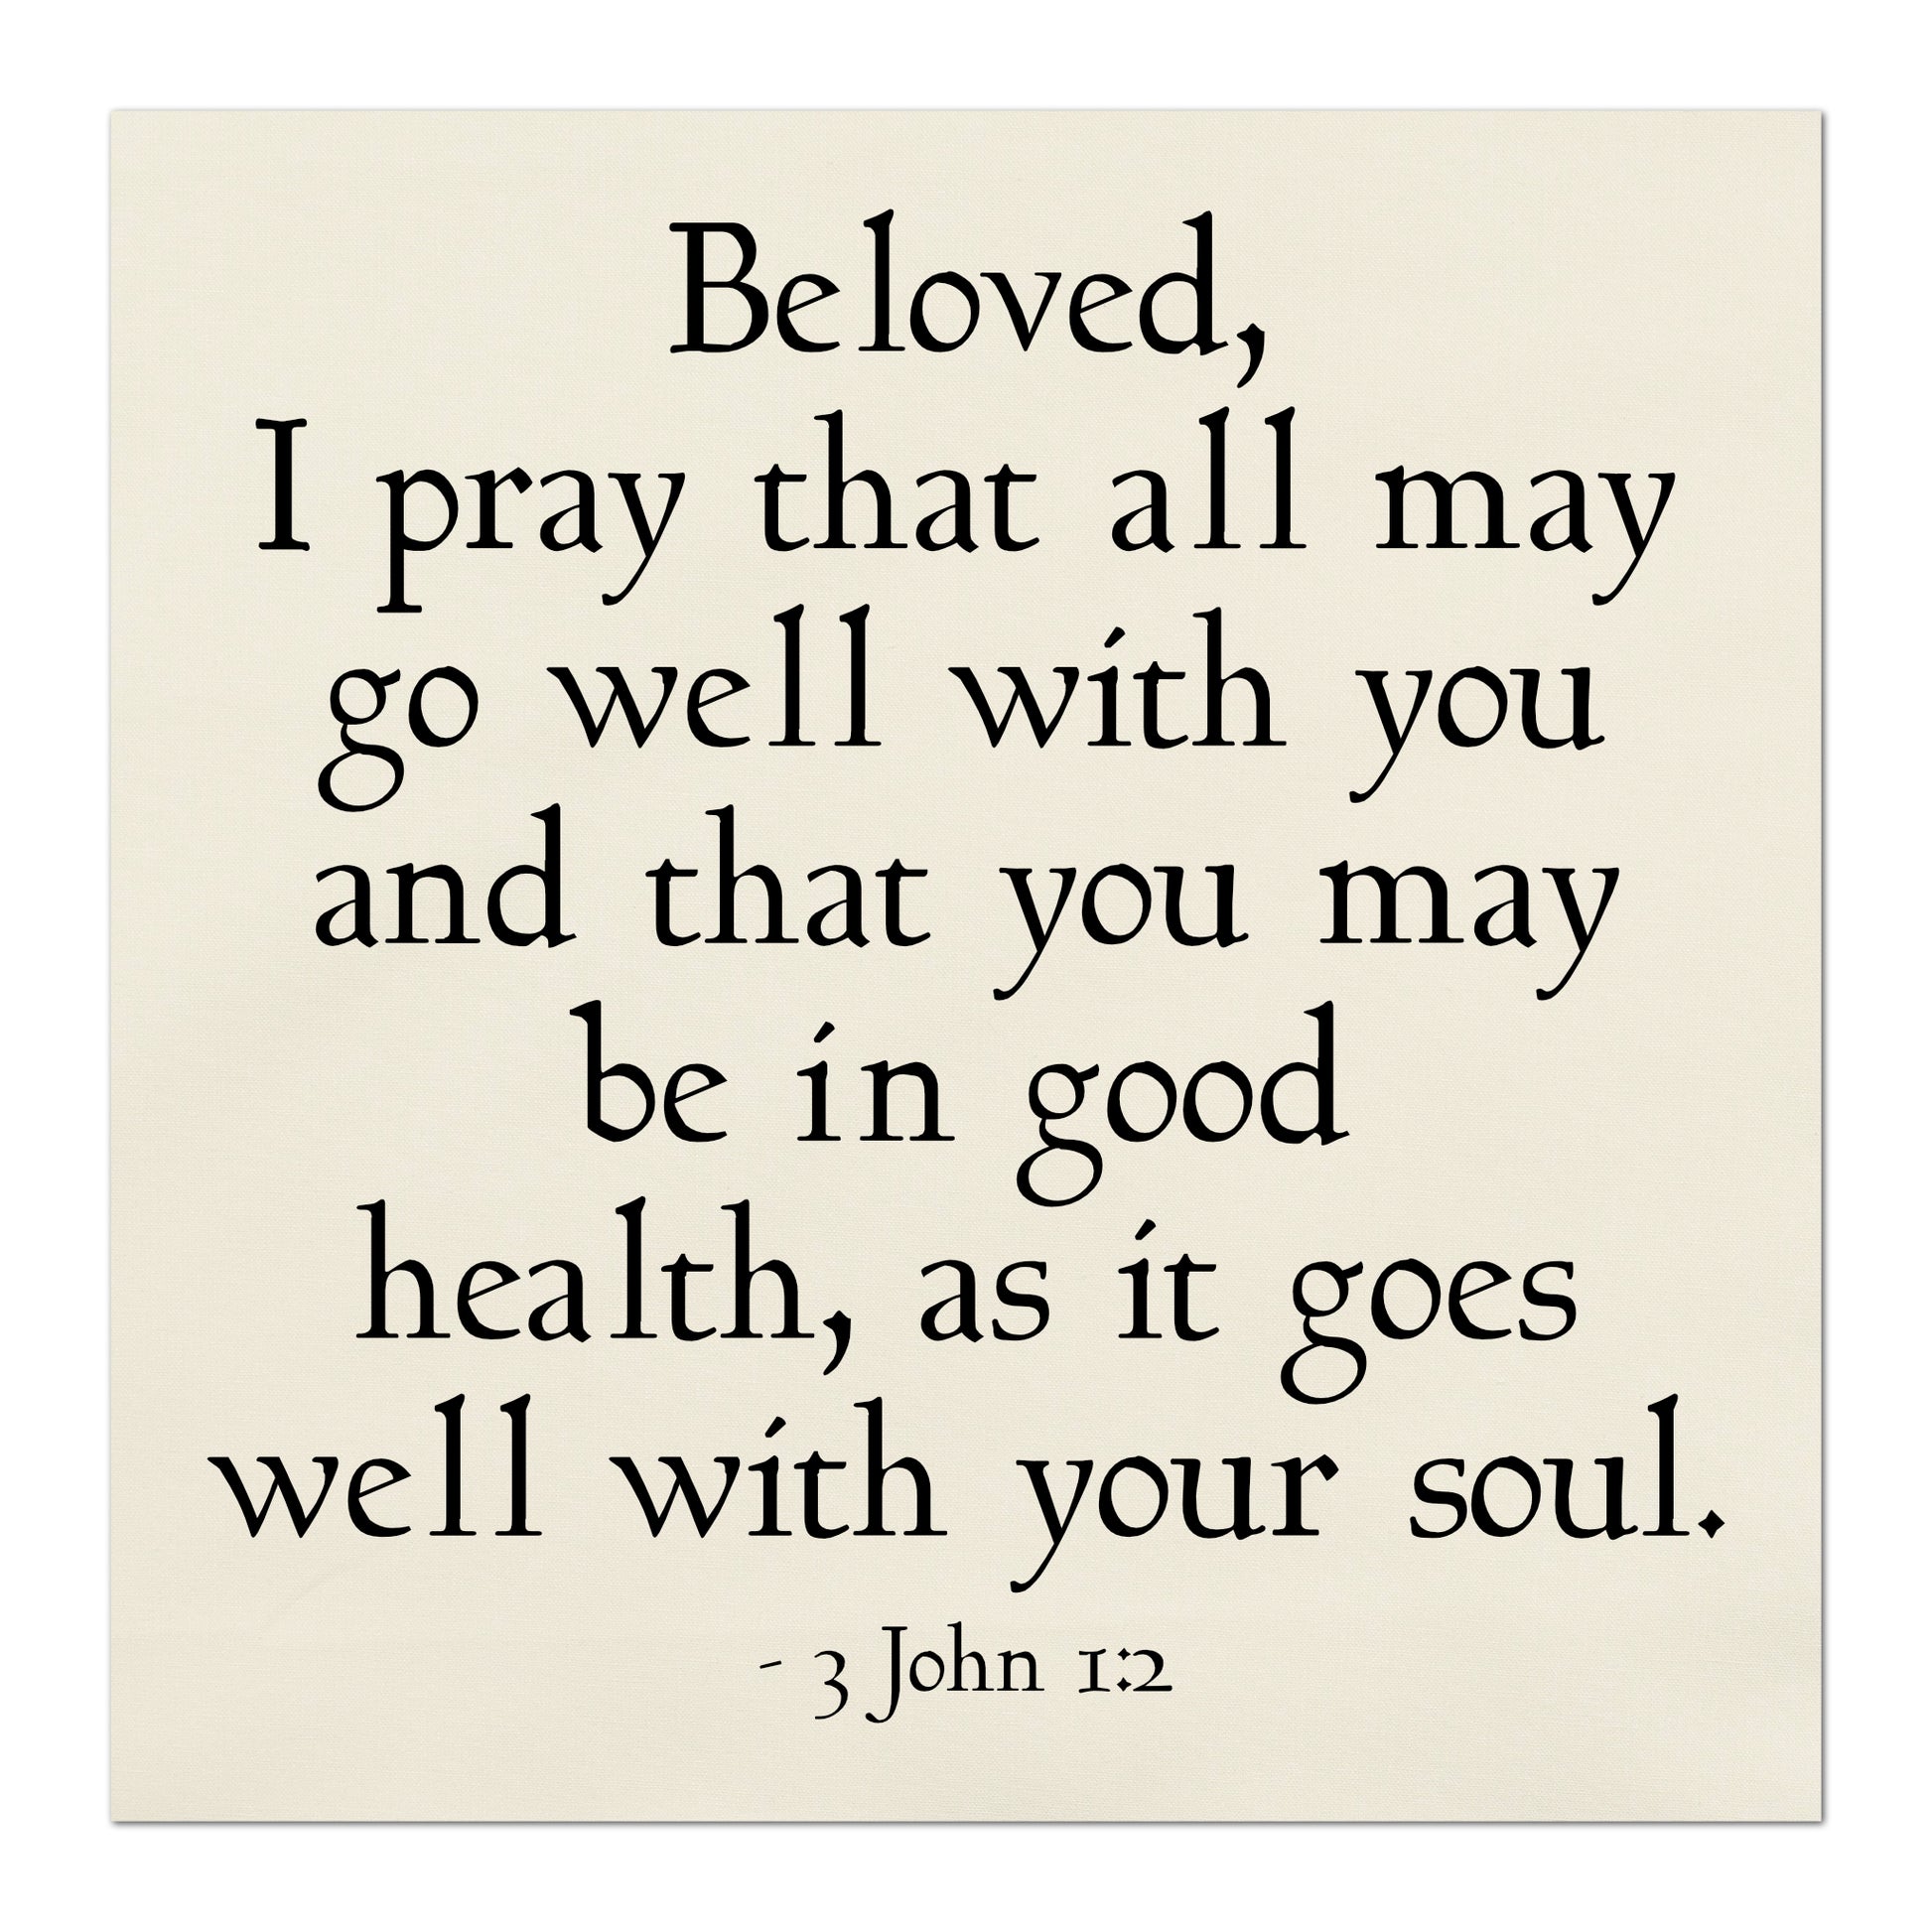 Beloved, I pray that all may go well with you and that you may be in good health, as it goes well with your soul - 3 John 1 2, Quilt, Wall Art Fabric